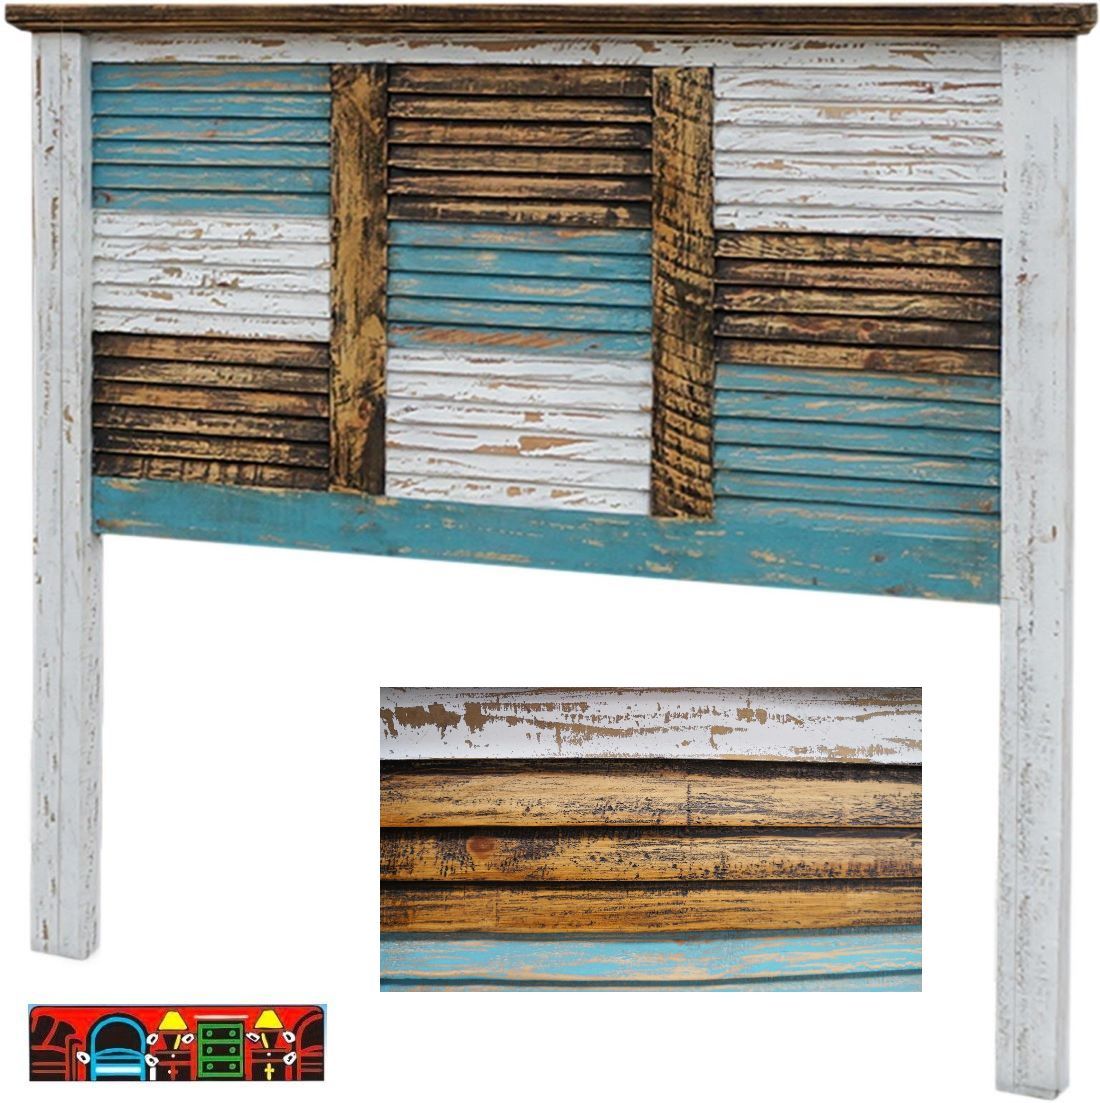 The Cabana Bedroom panel headboard is crafted from solid wood, featuring a blend of brown, white, and turquoise hues with a patchwork design of individual slats.